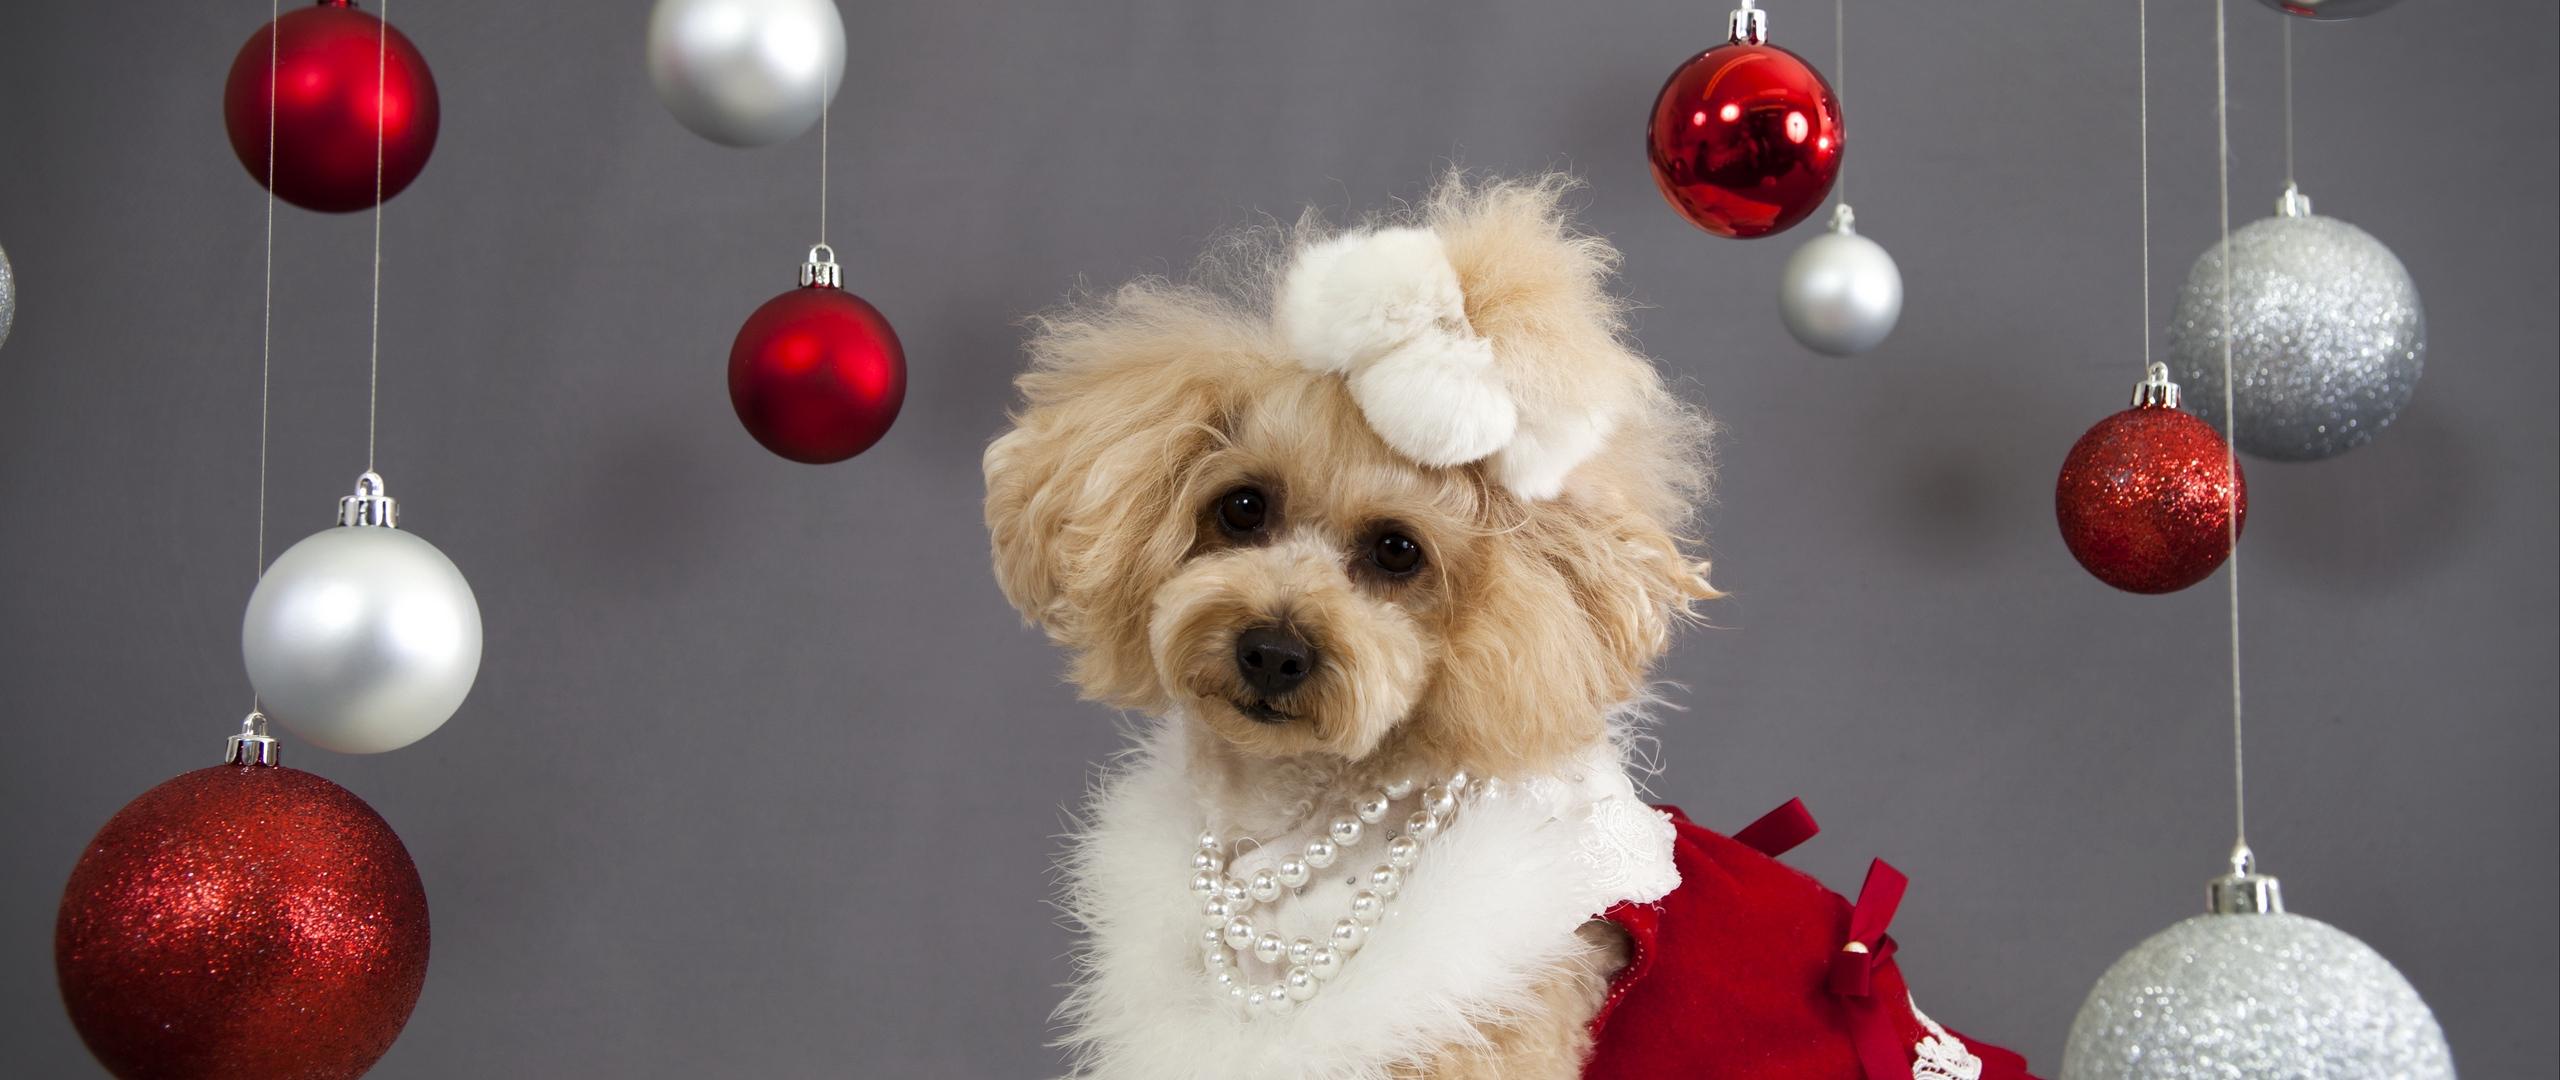 Download wallpaper 2560x1080 dog, christmas ornaments, face